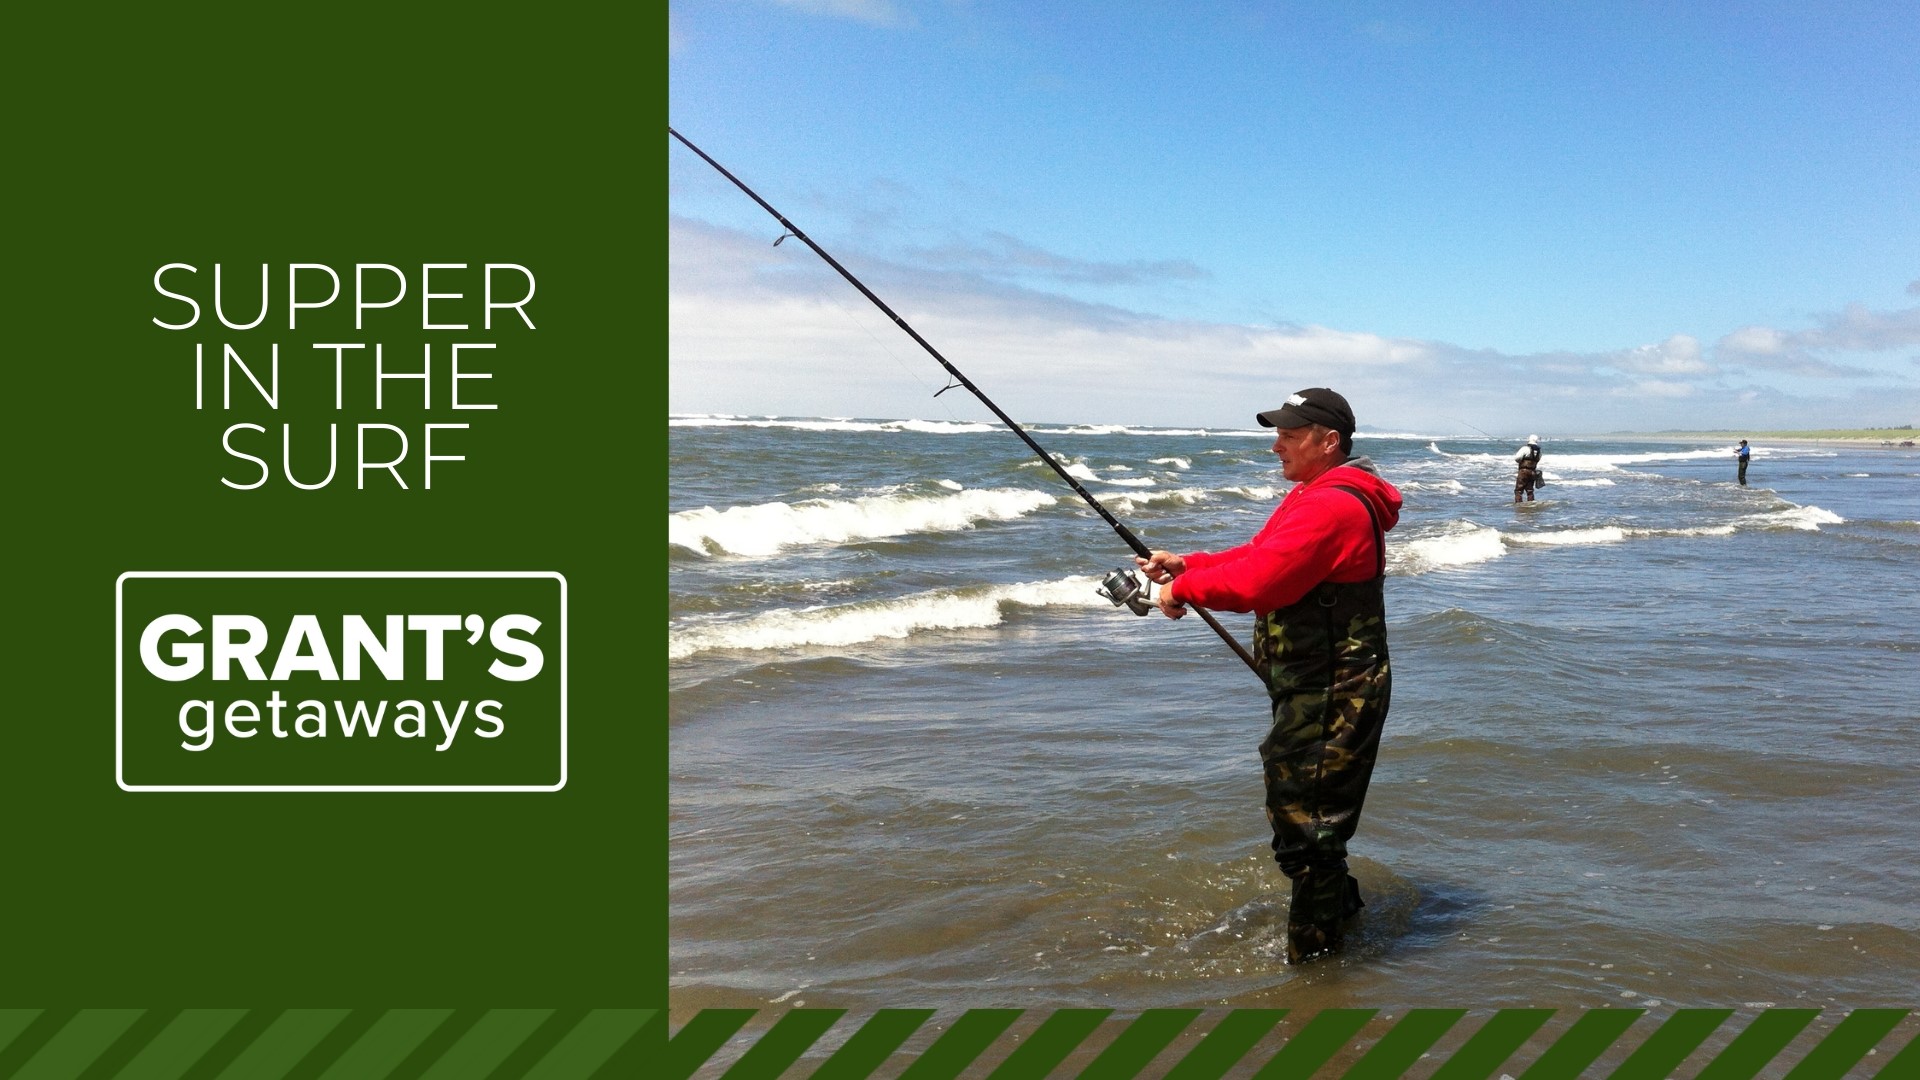 Digging for razor clams and surf angling are classic Oregon coast adventures that provide uniquely satisfying outdoor experiences.